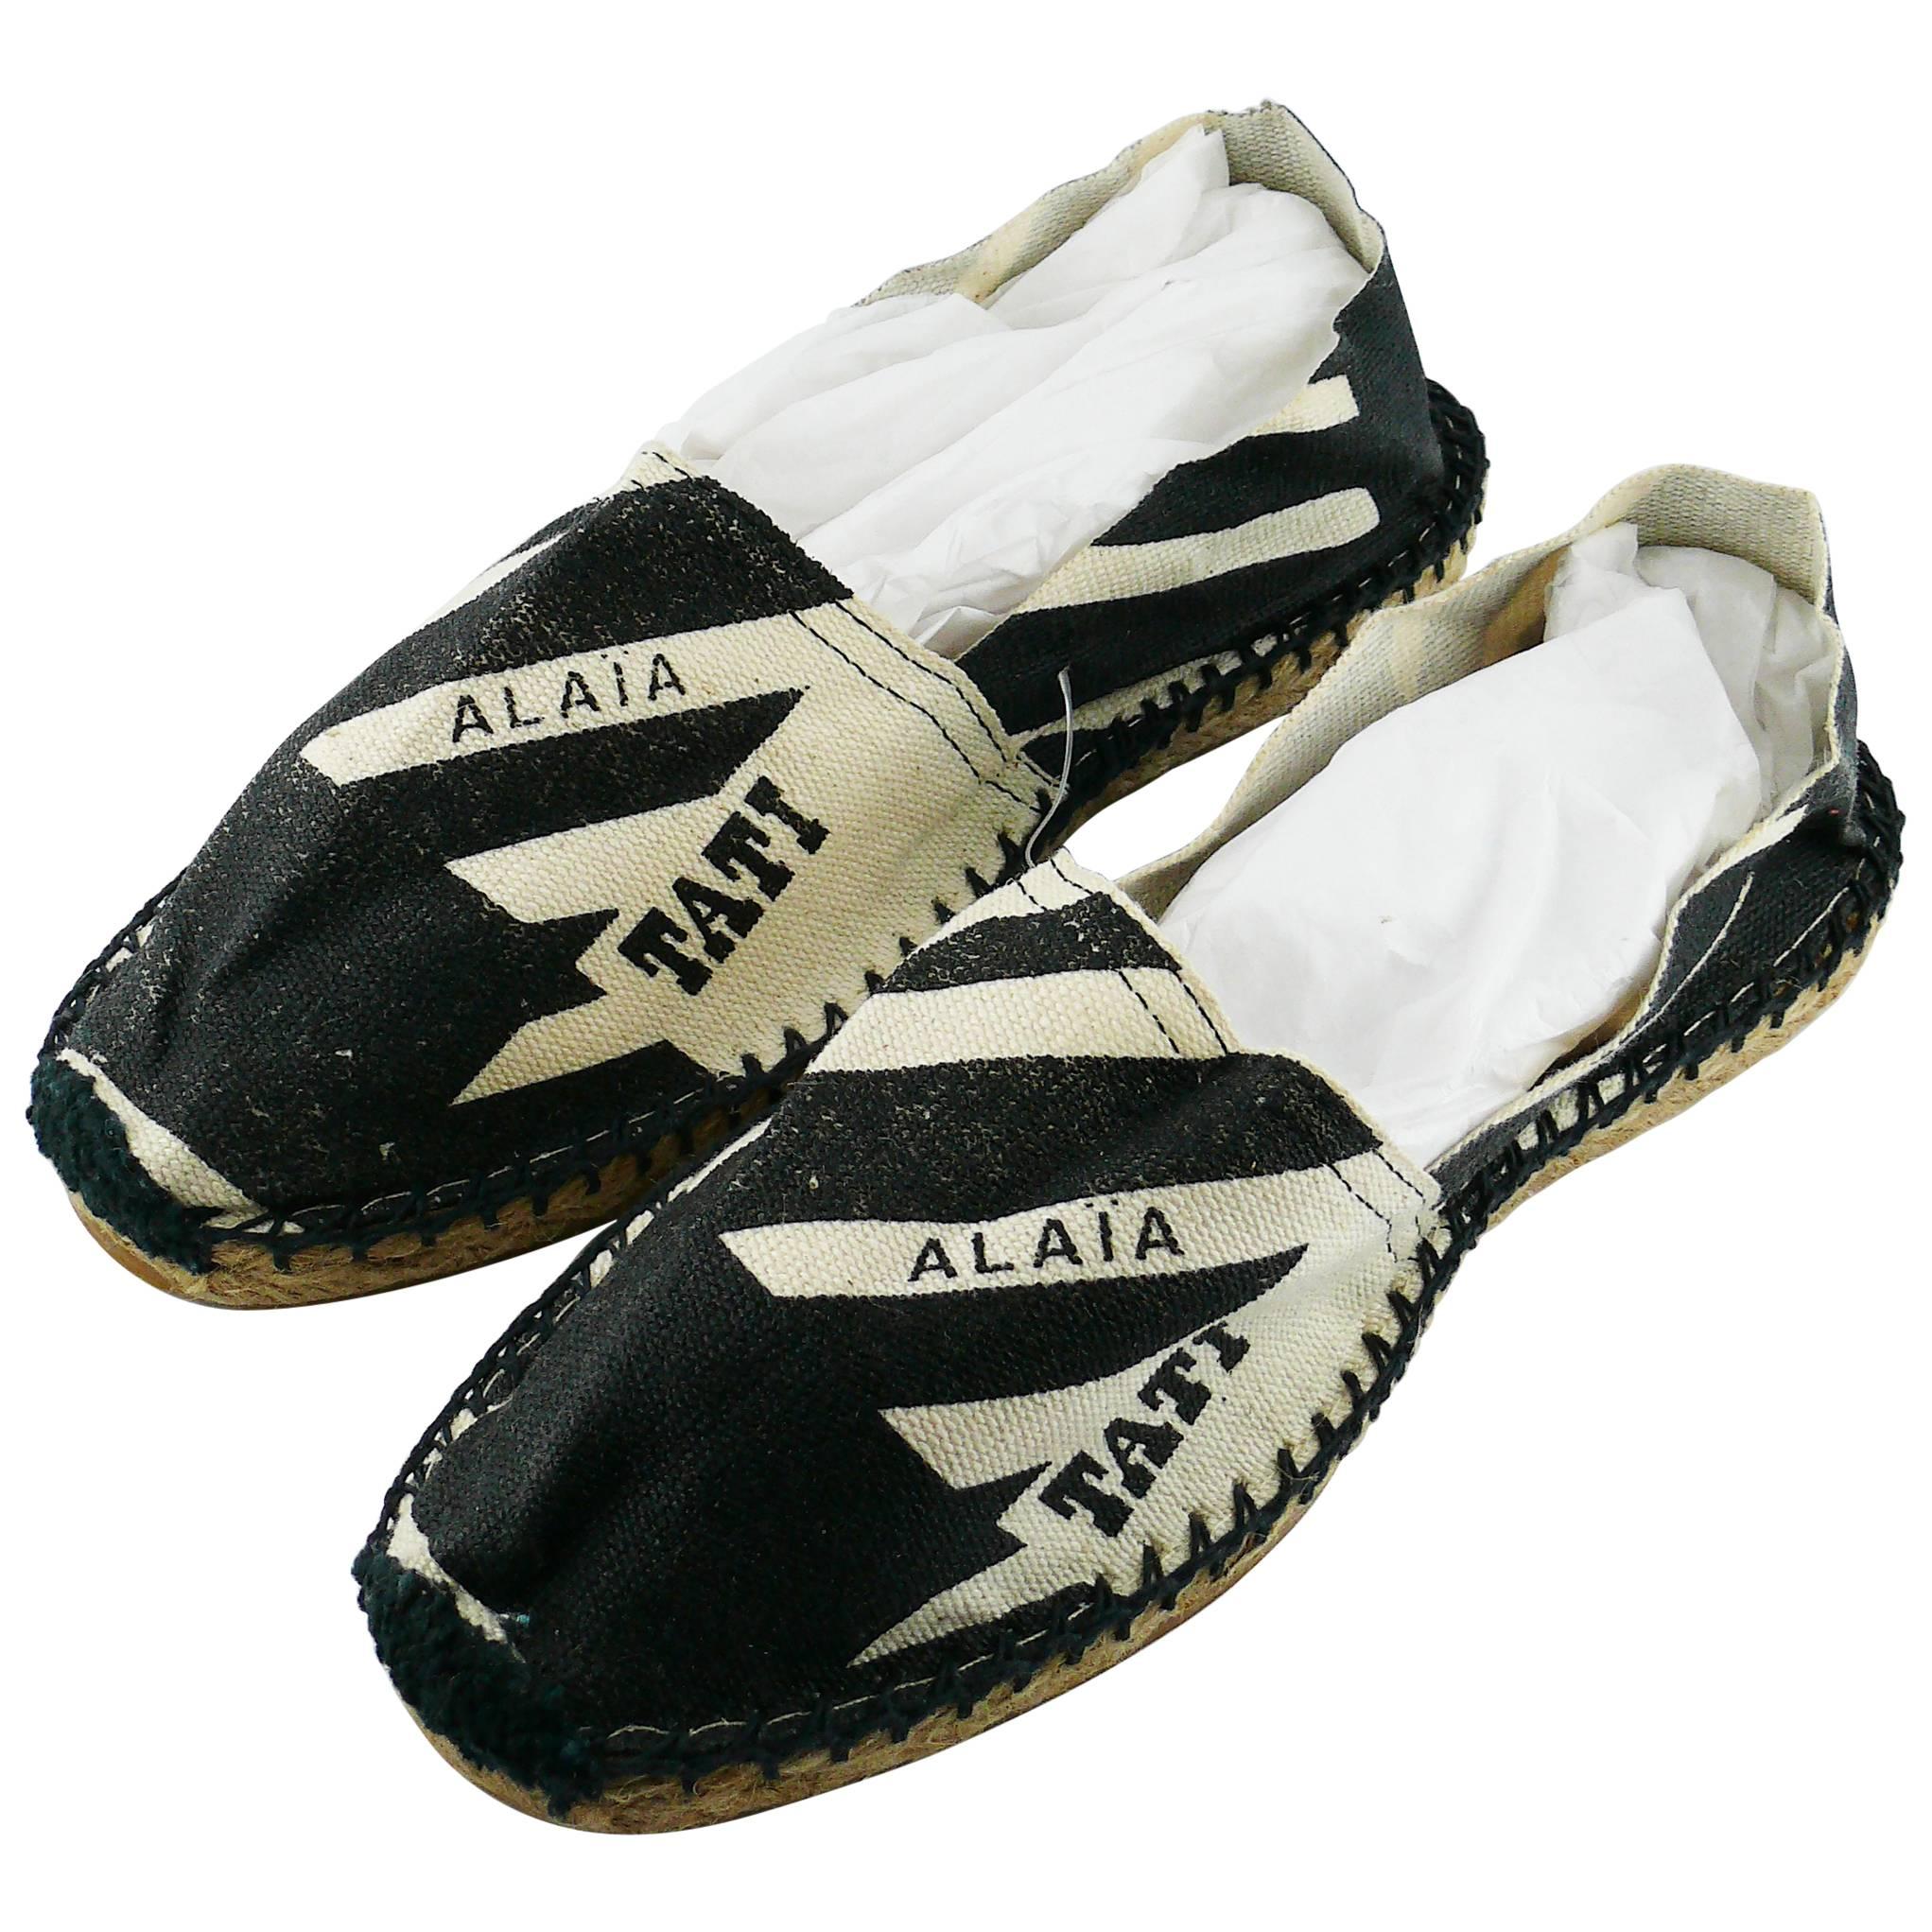 Alaia Vintage Iconic Navy Blue and Off-white Canvas Espadrilles Size 37 (FR)